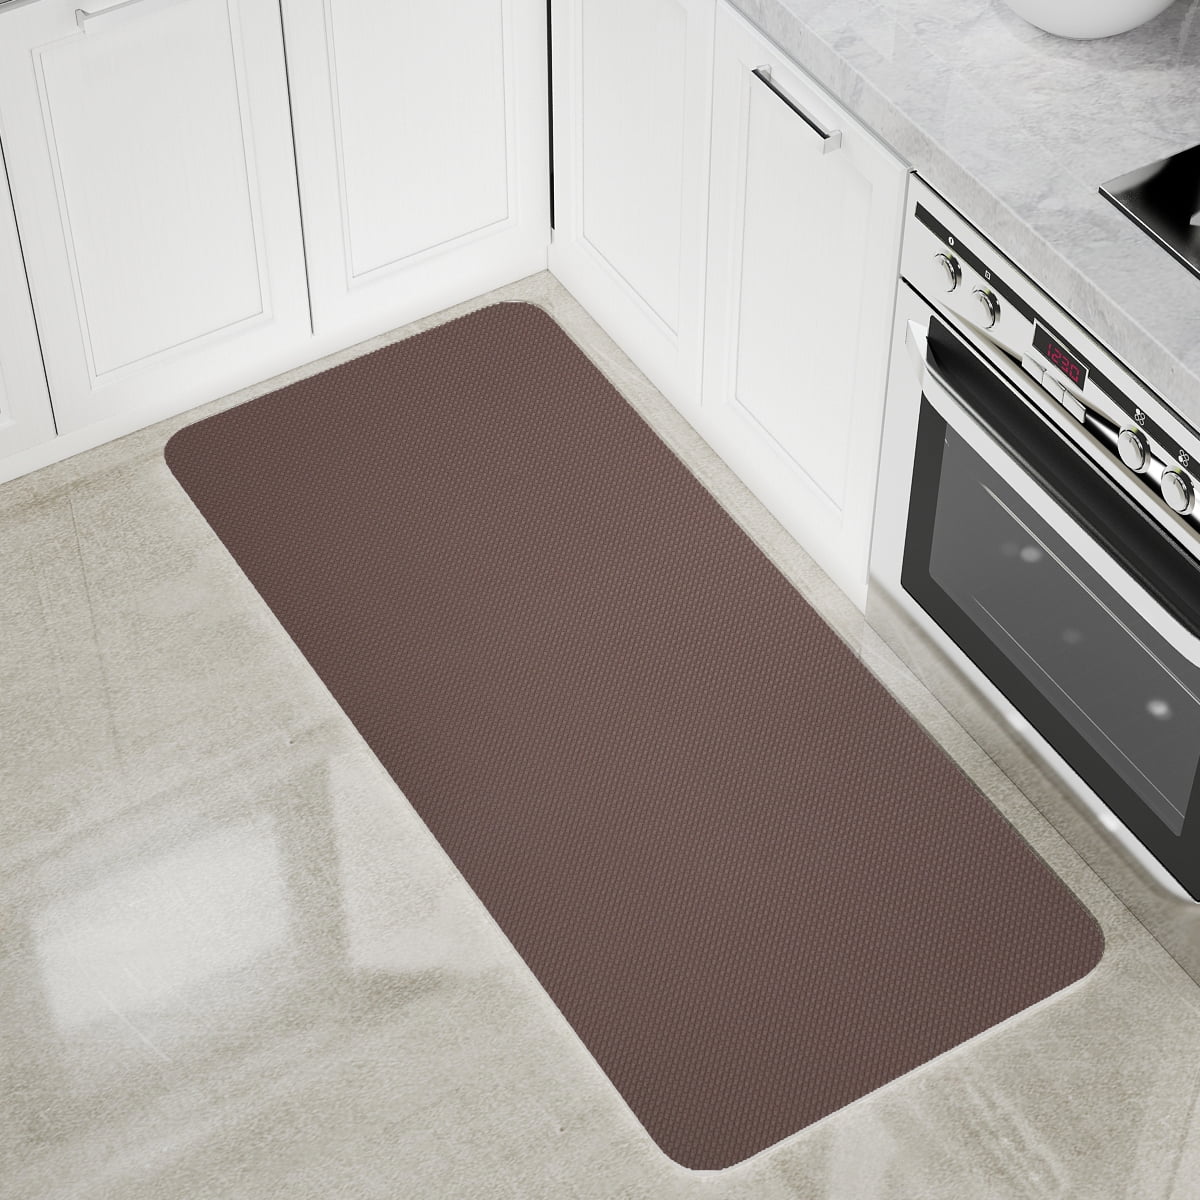 Art3d Black 39 in. x 20 in. Anti-Fatigue Kitchen Mat Commercial Floor Mat  Non-Slip and All-Purpose Comfort for Kitchen Office Y12hd012 - The Home  Depot